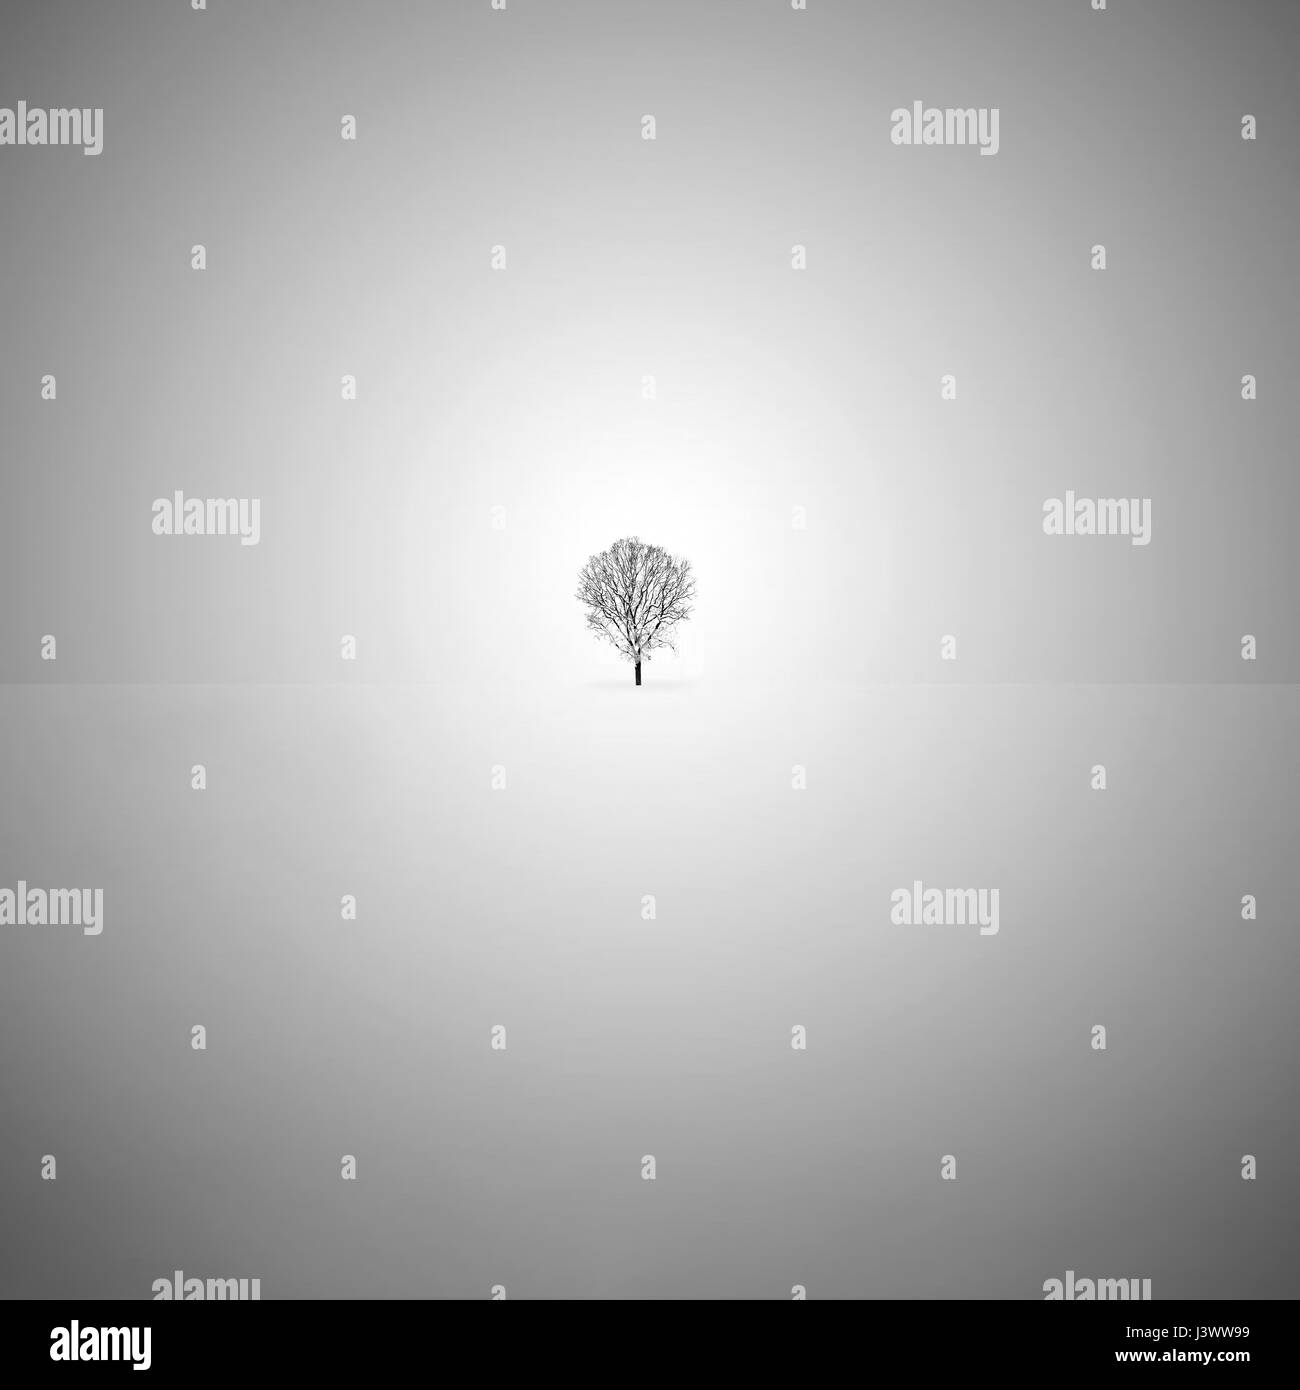 Minimalist fine art black and white photo with a lone tree in the snow. Stock Photo